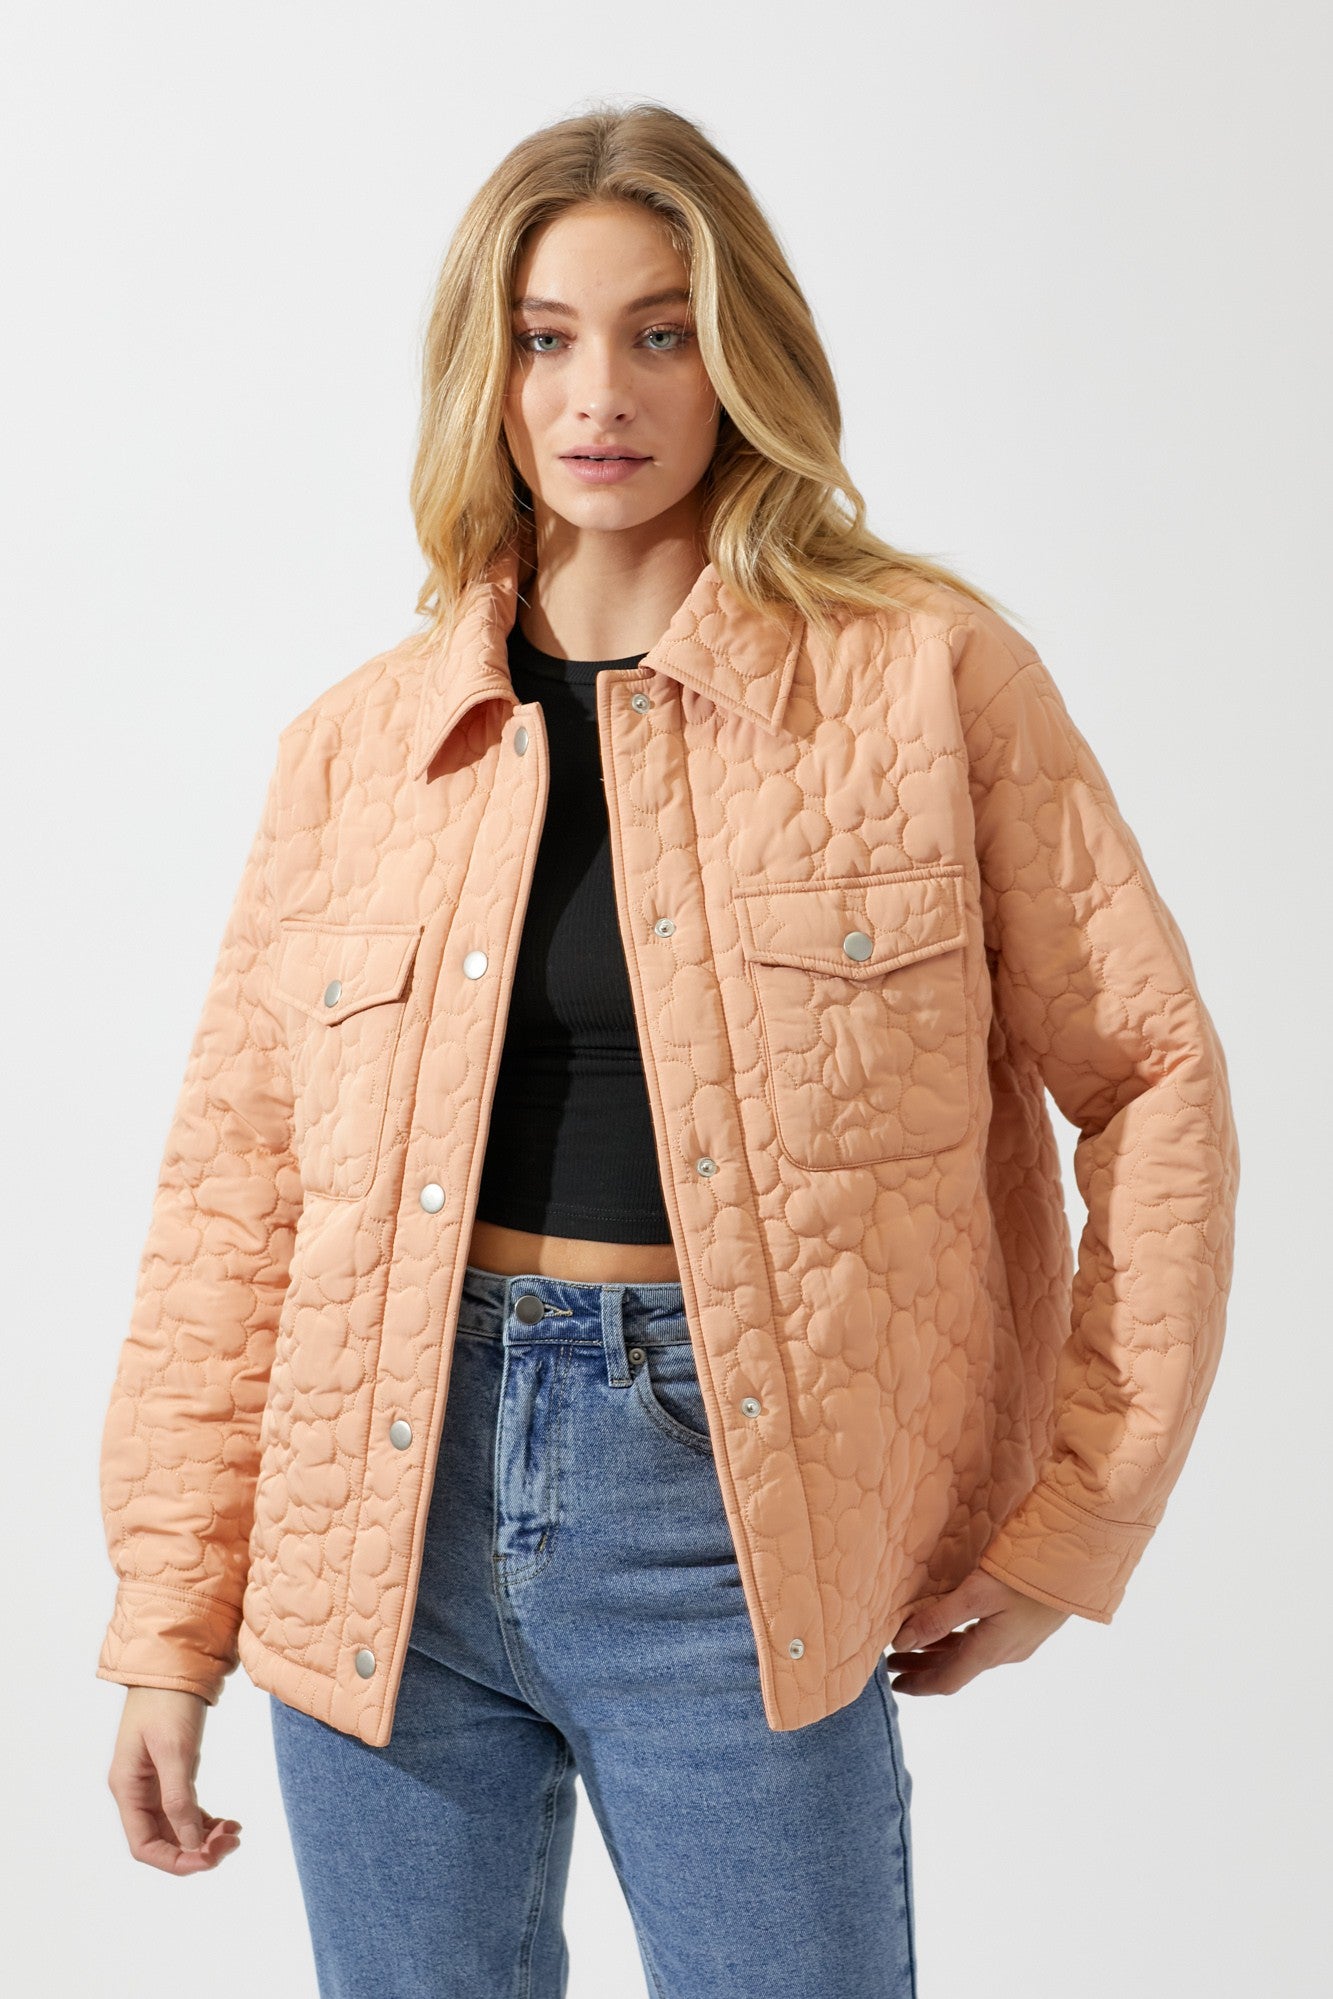 This quilted jacket has the cutest pattern of daisies througout the whole jacket. It'll have you thinking about stopping to smell the flowers all day long! We love this fresh take on a classic button up jacket!